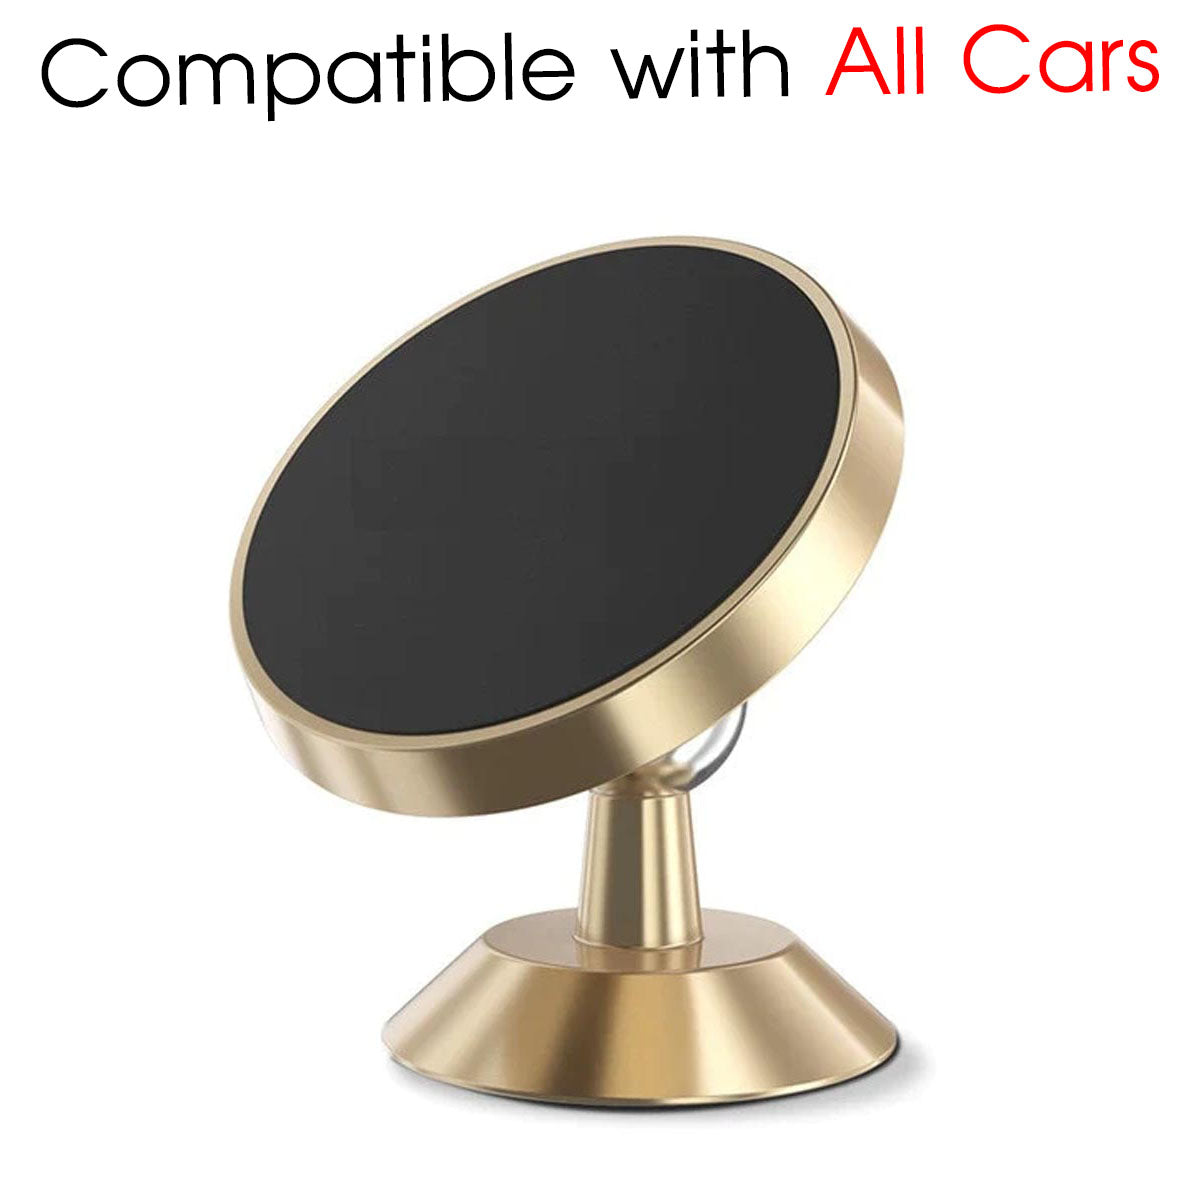 [2 Pack ] Magnetic Phone Mount, Custom For Your Cars, [ Super Strong Magnet ] [ with 4 Metal Plate ] car Magnetic Phone Holder, [ 360° Rotation ] Universal Dashboard car Mount Fits All Cell Phones, Car Accessories CC13982